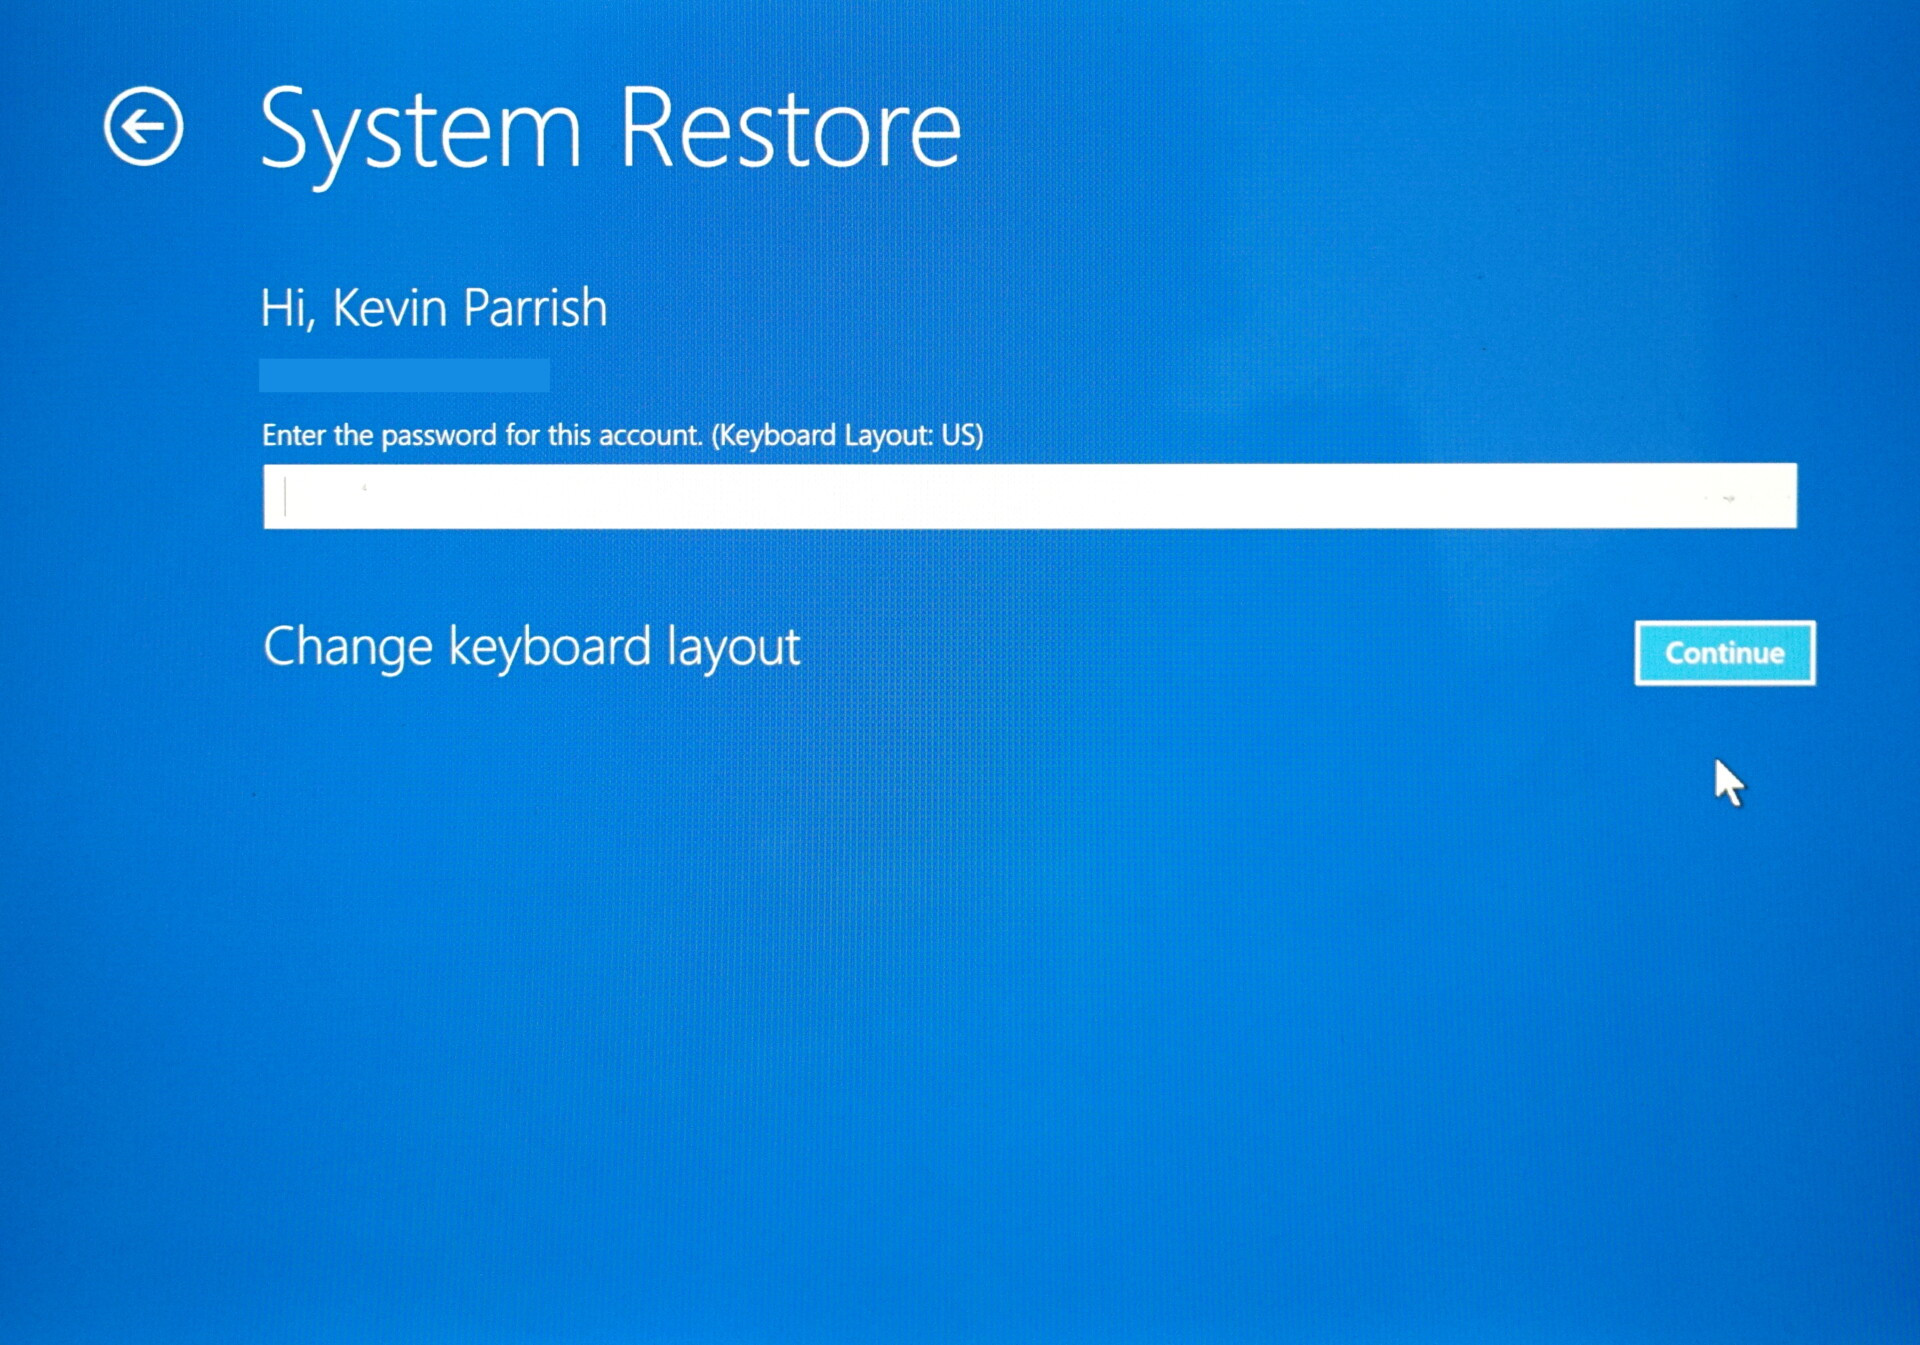 Windows 10 System Restore account - how to do a System Restore on Windows 10